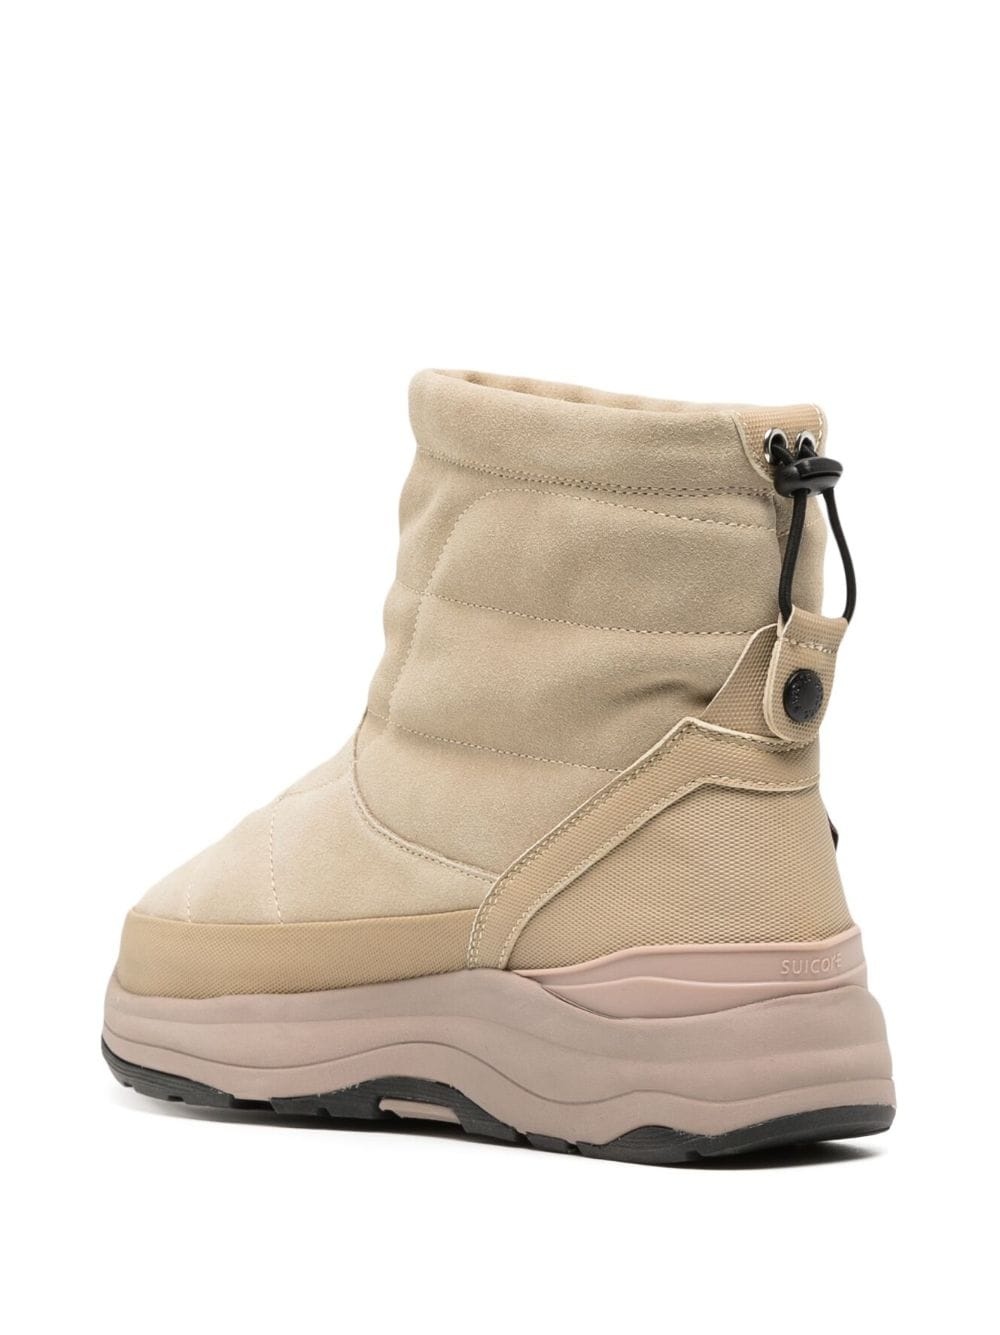 Bower suede snow boots - 3